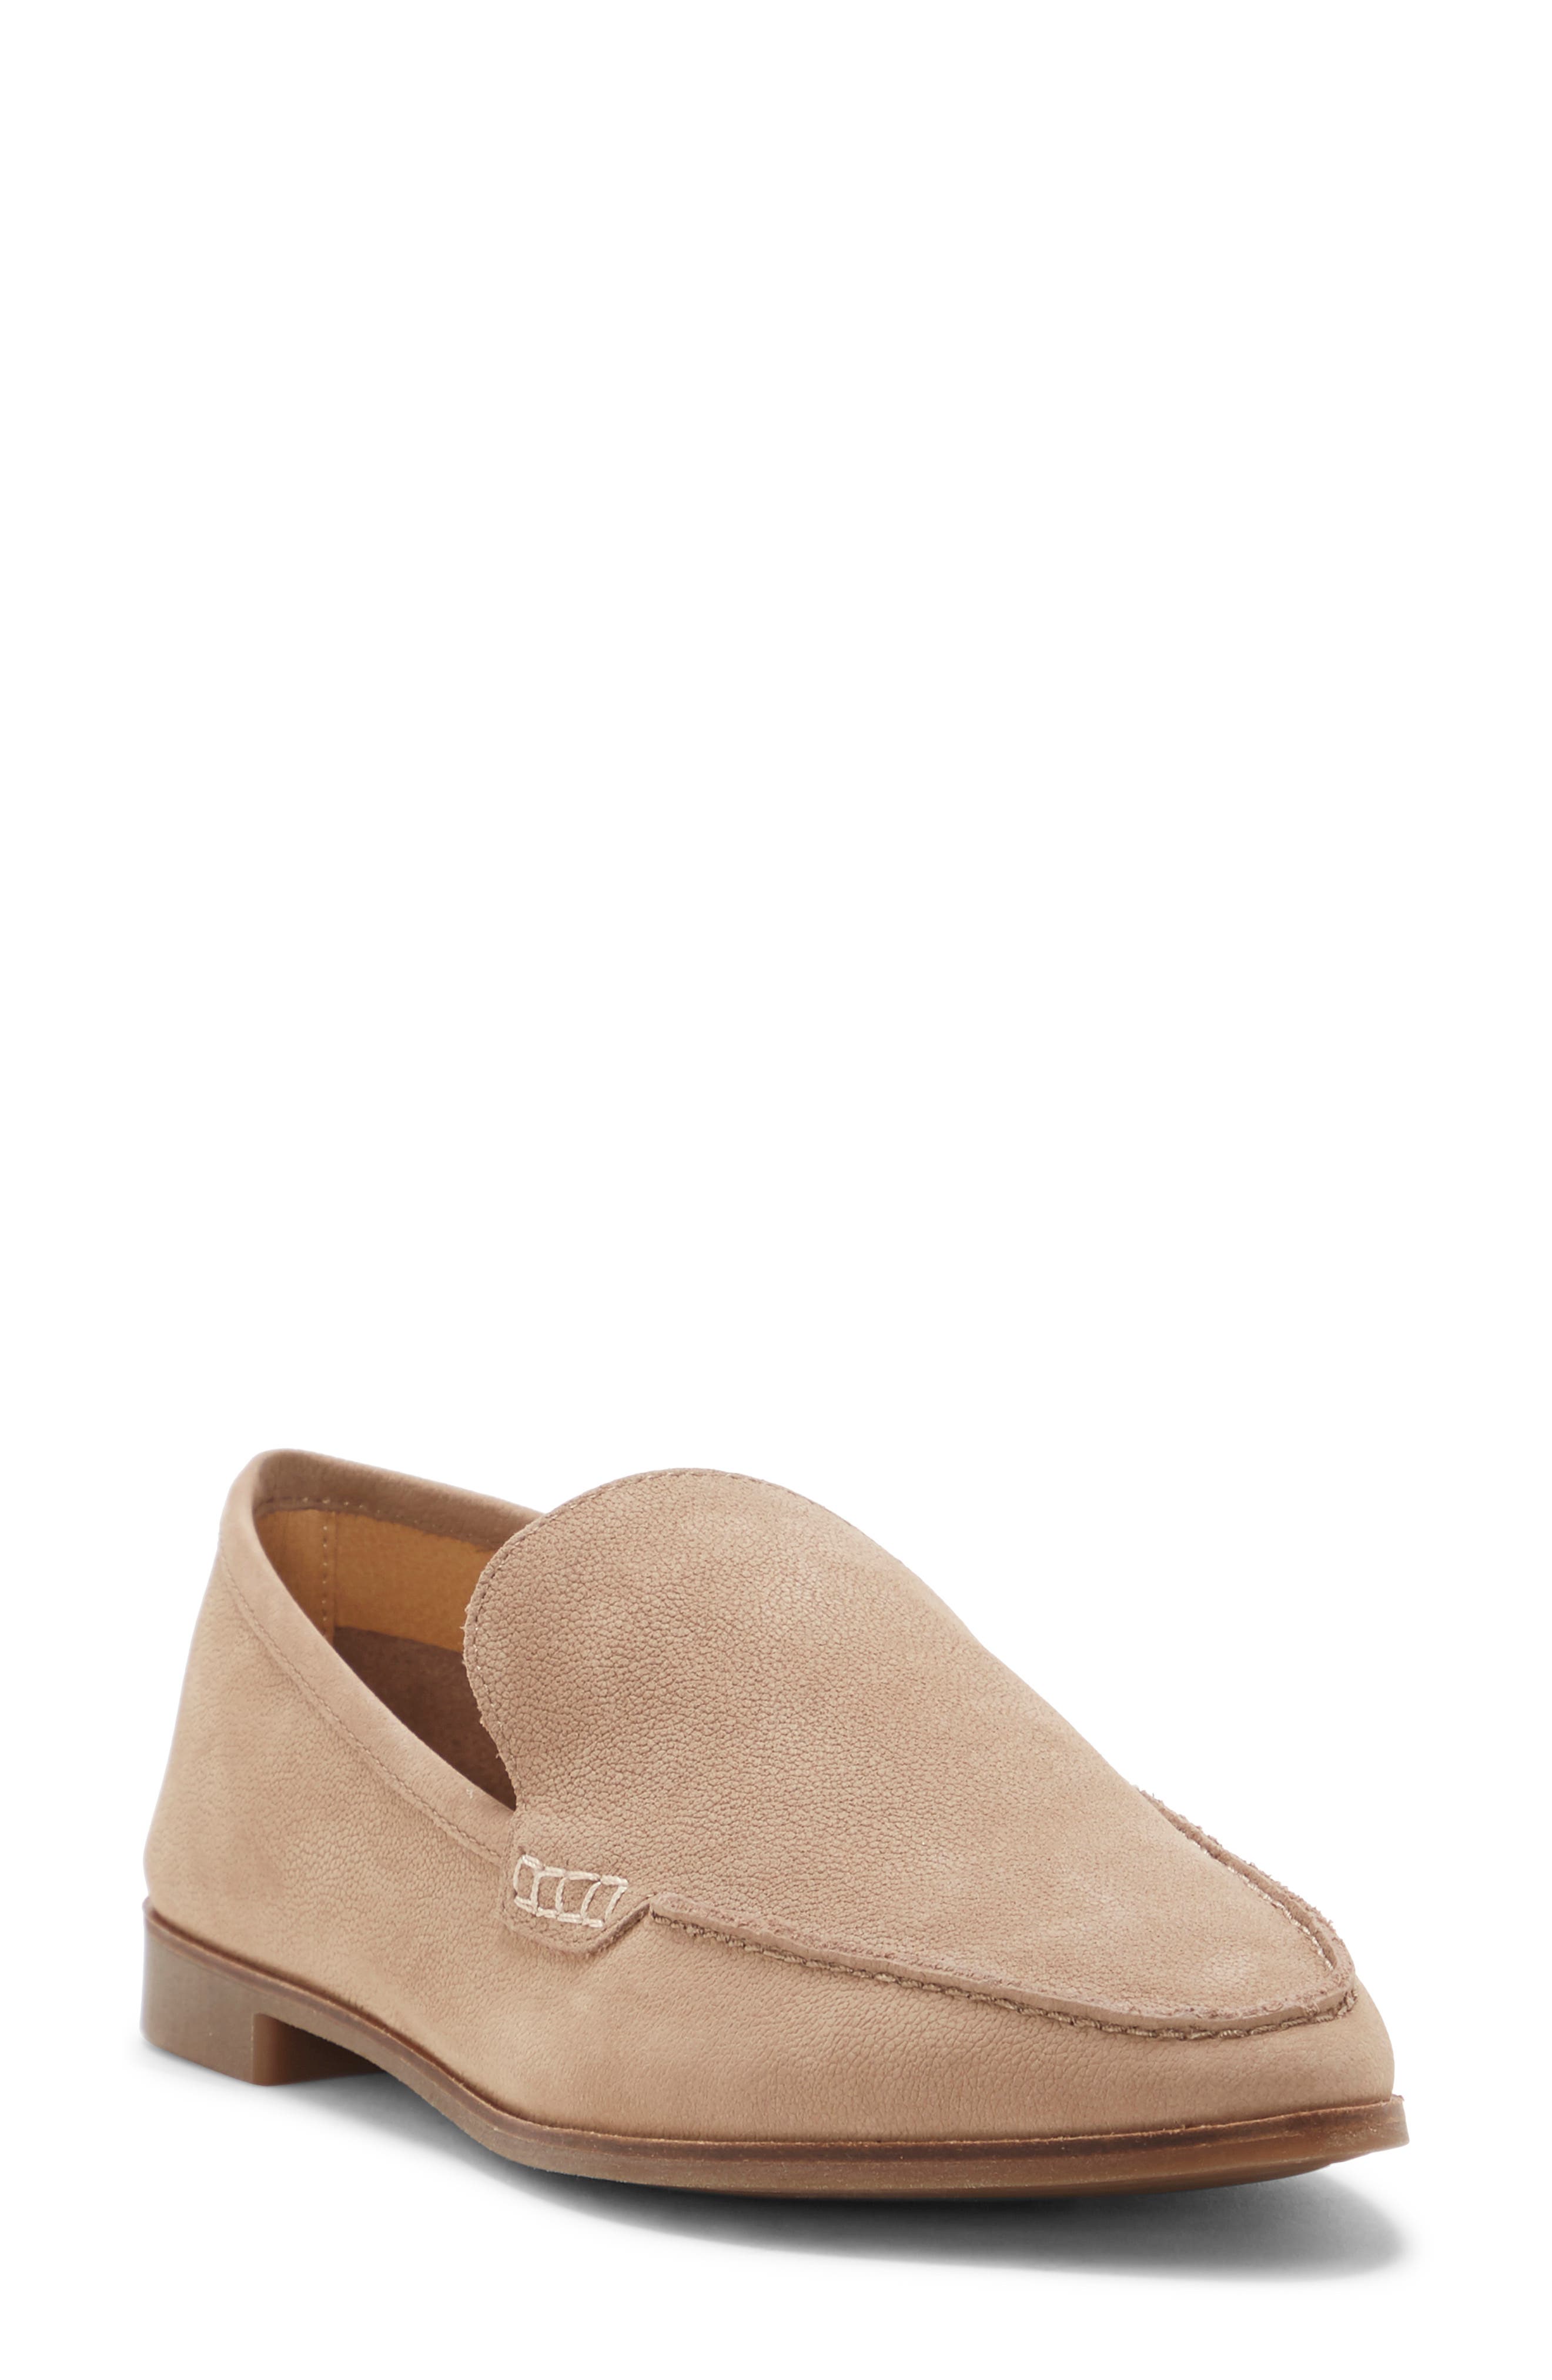 lucky brand suede loafers